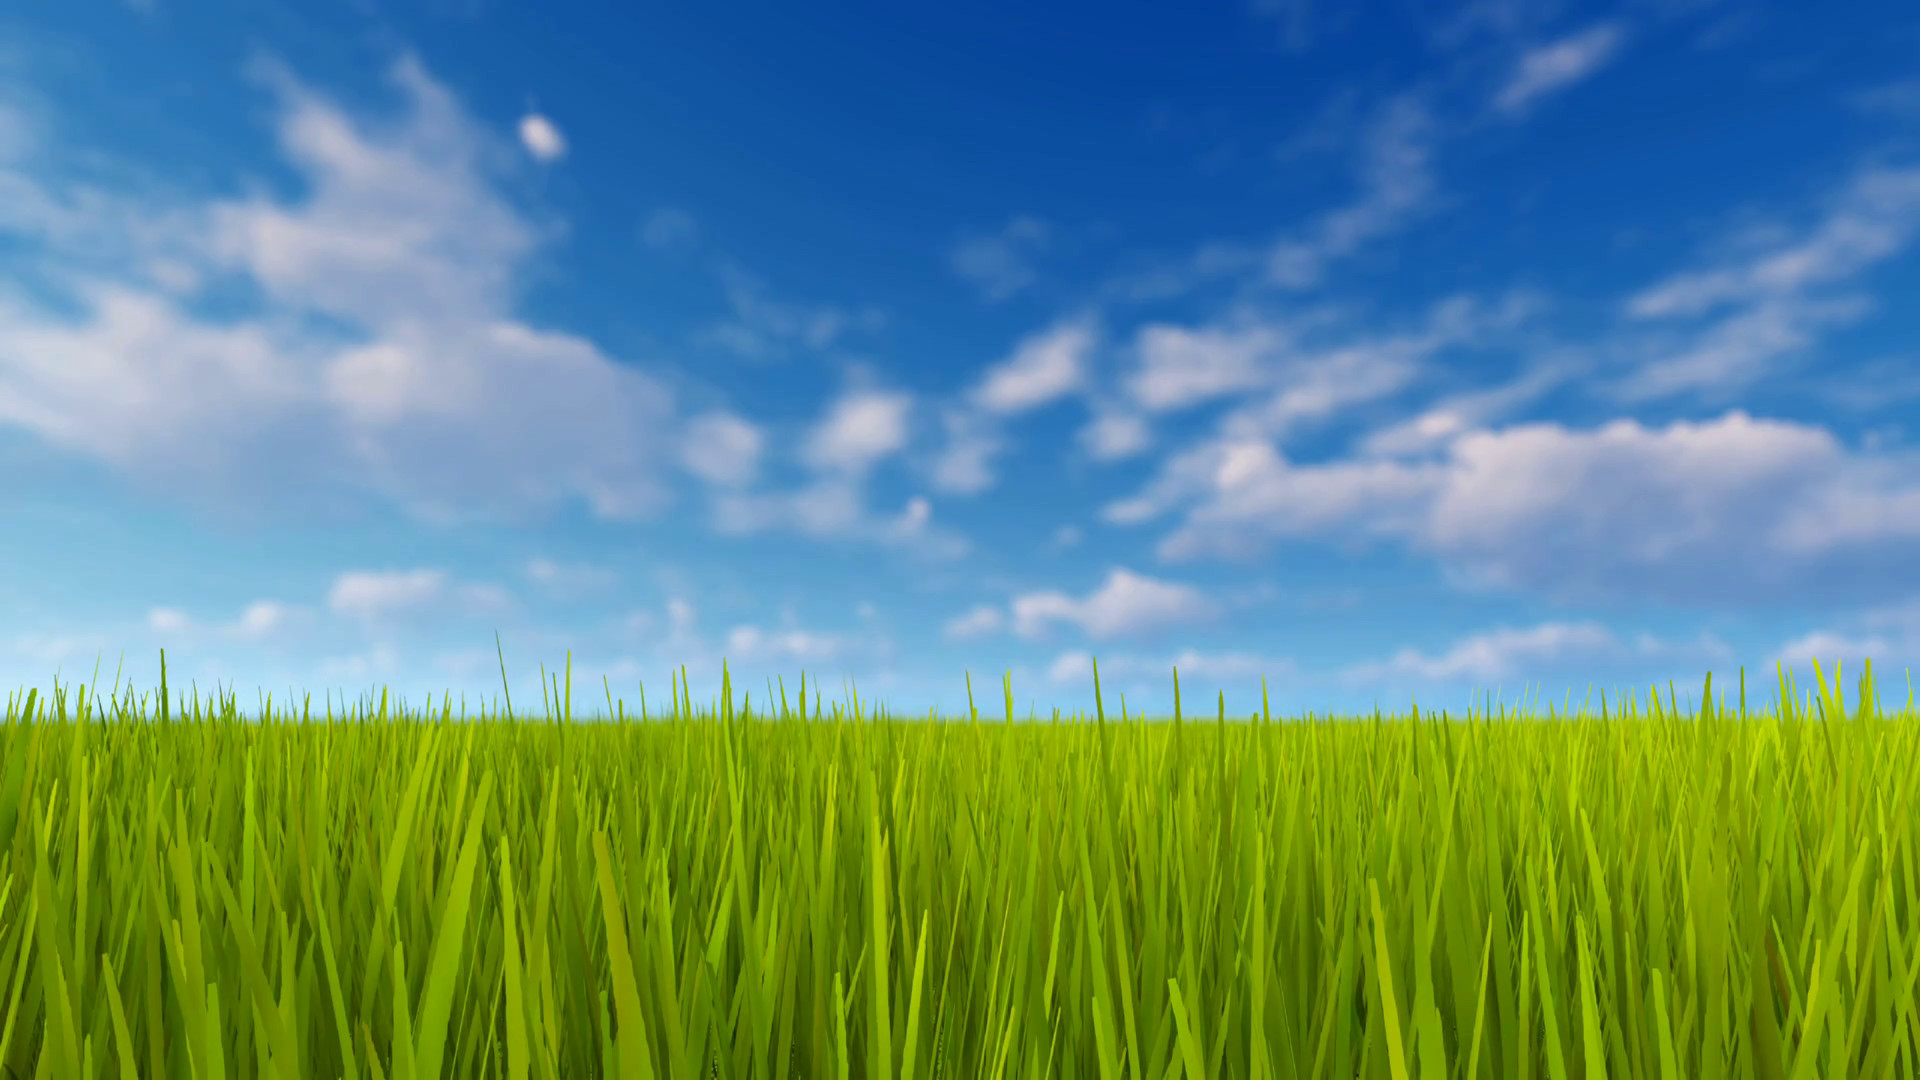 1920x1080 Simple natural background with closeup of fresh green grass field and blue  sky with blurred clouds